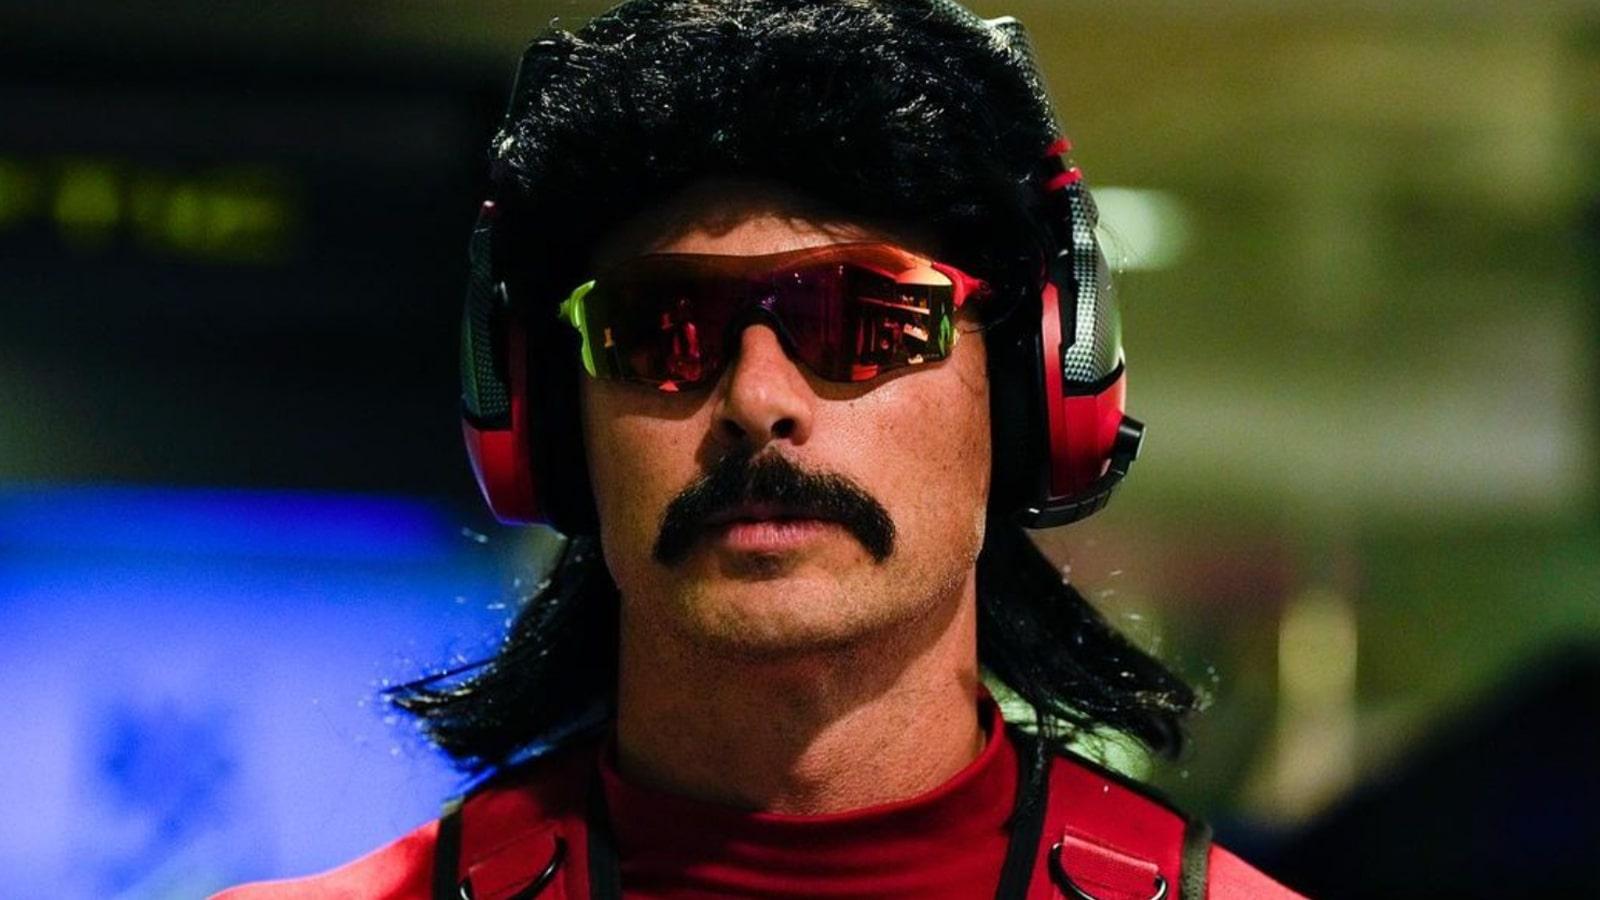 DrDisrespect staring ahead at event